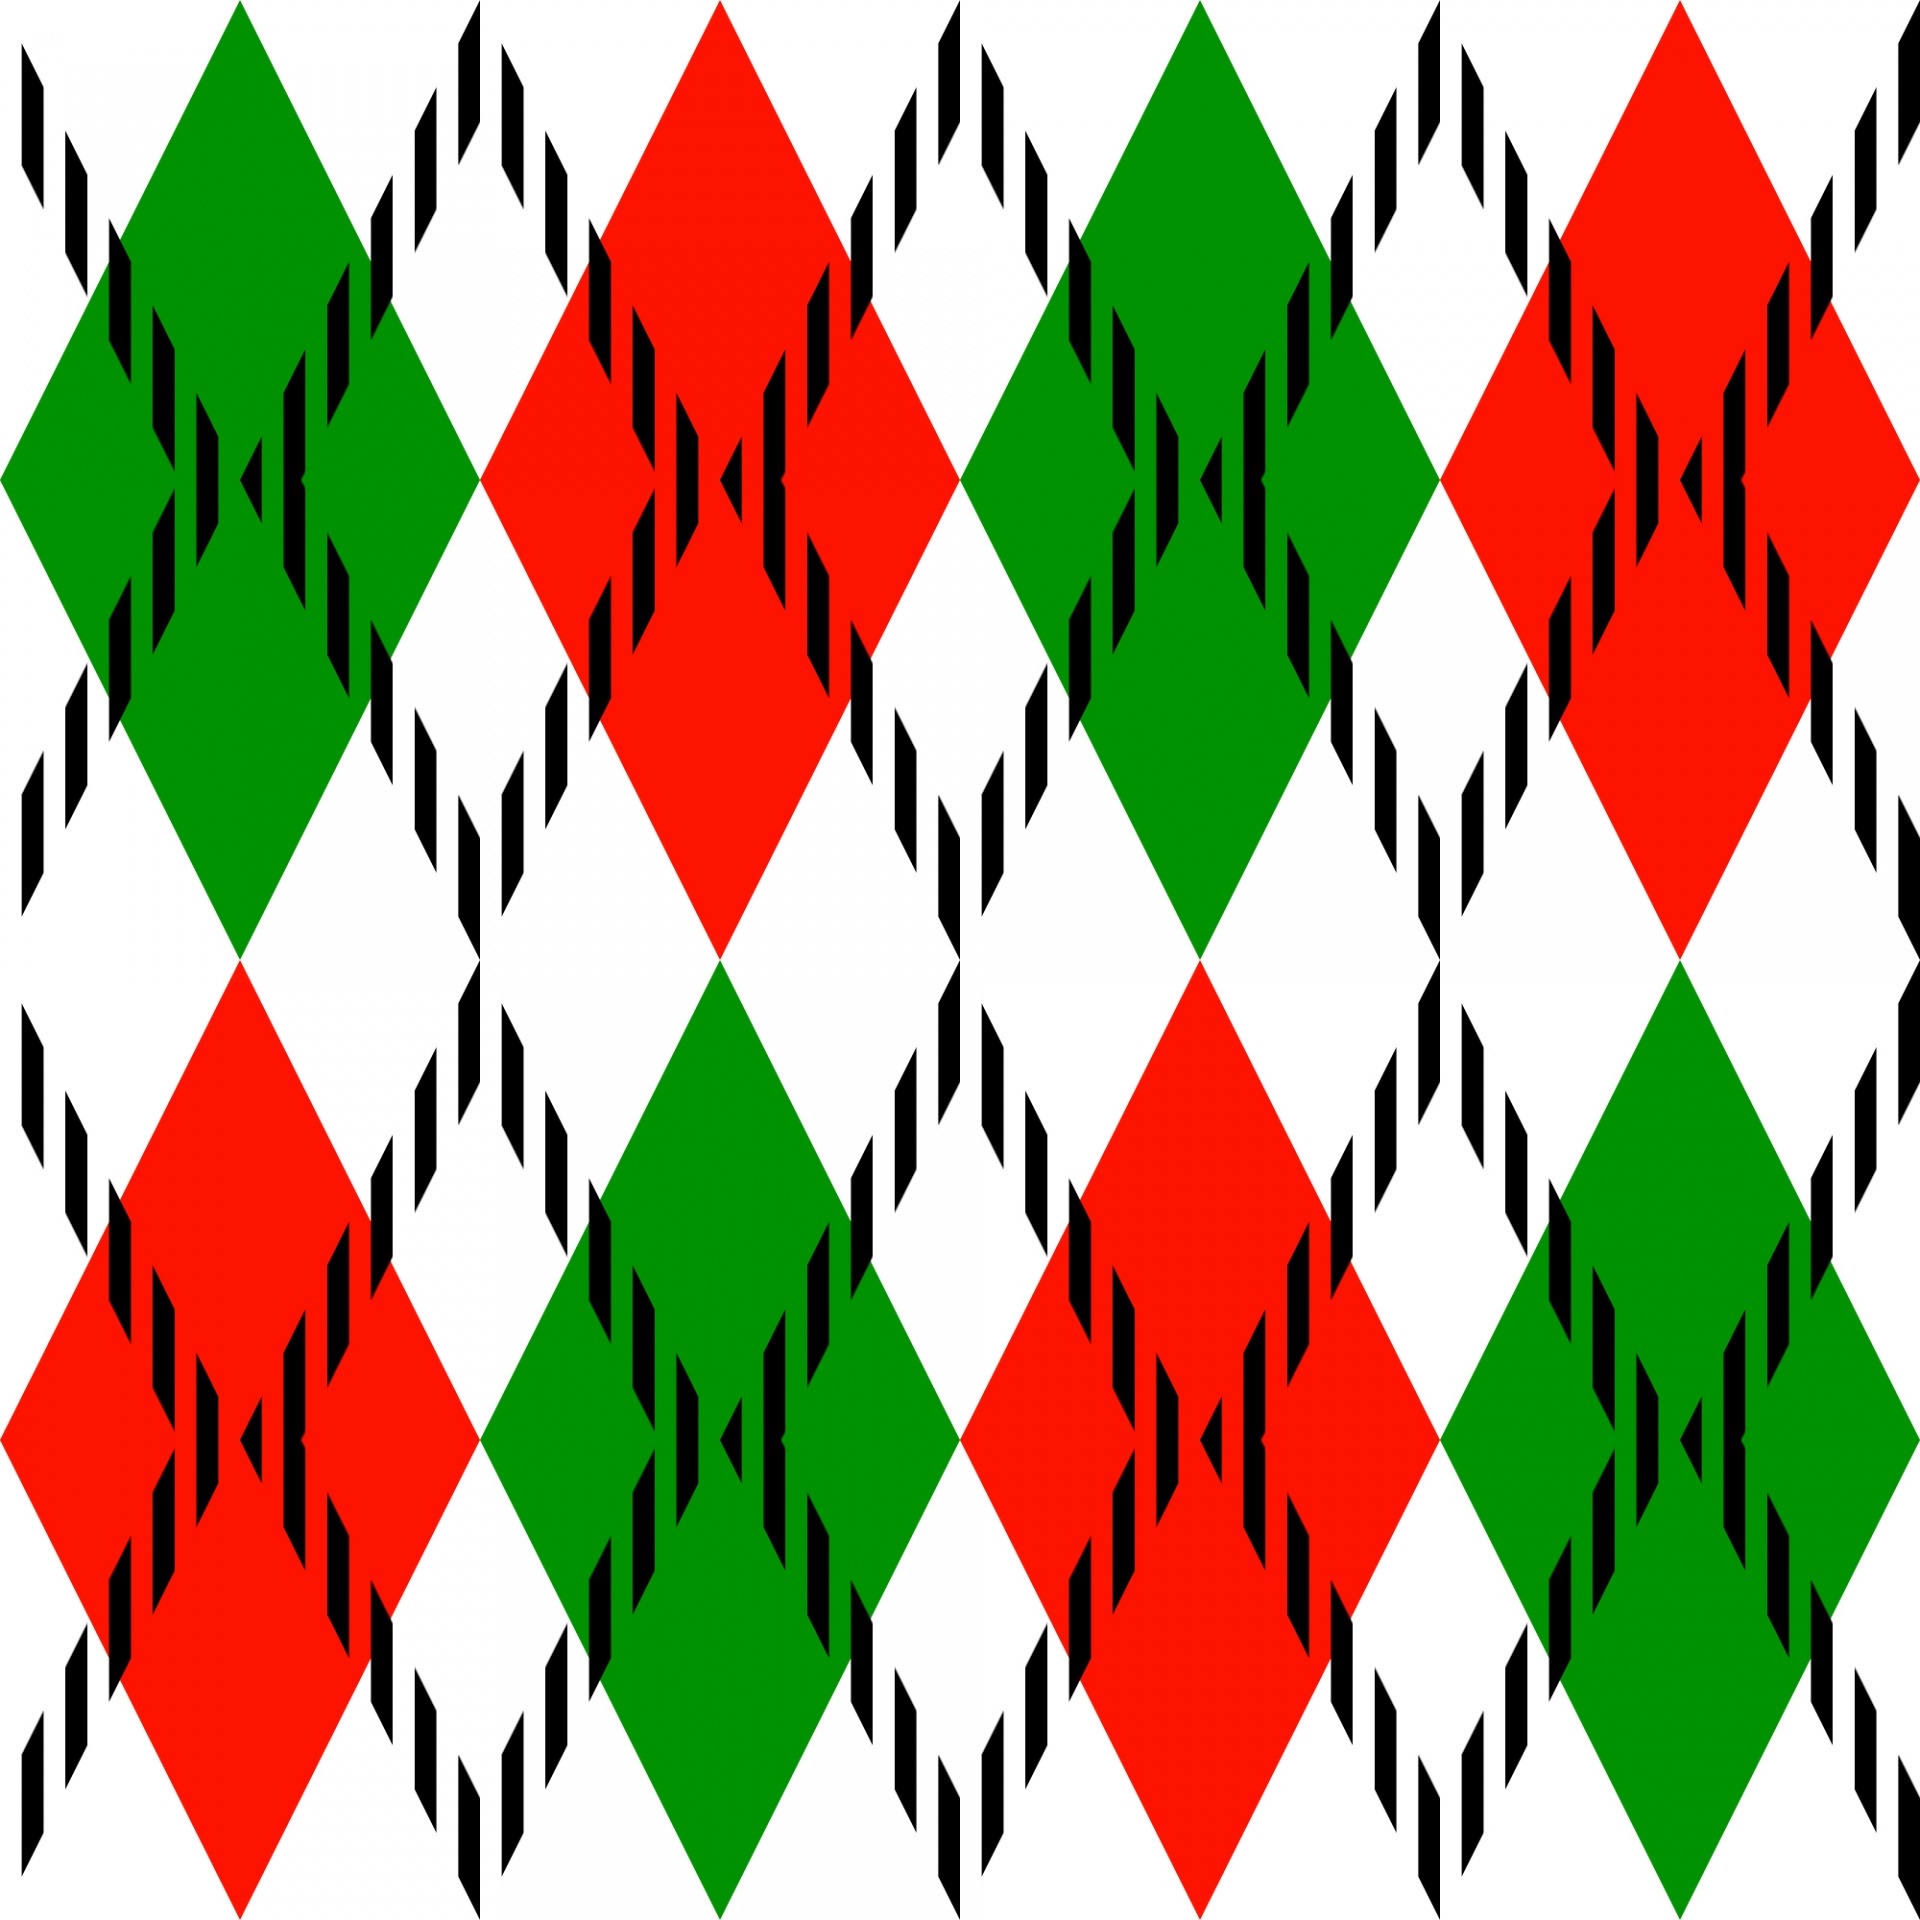 red, green triangles Argyle pattern with black stripes on white background